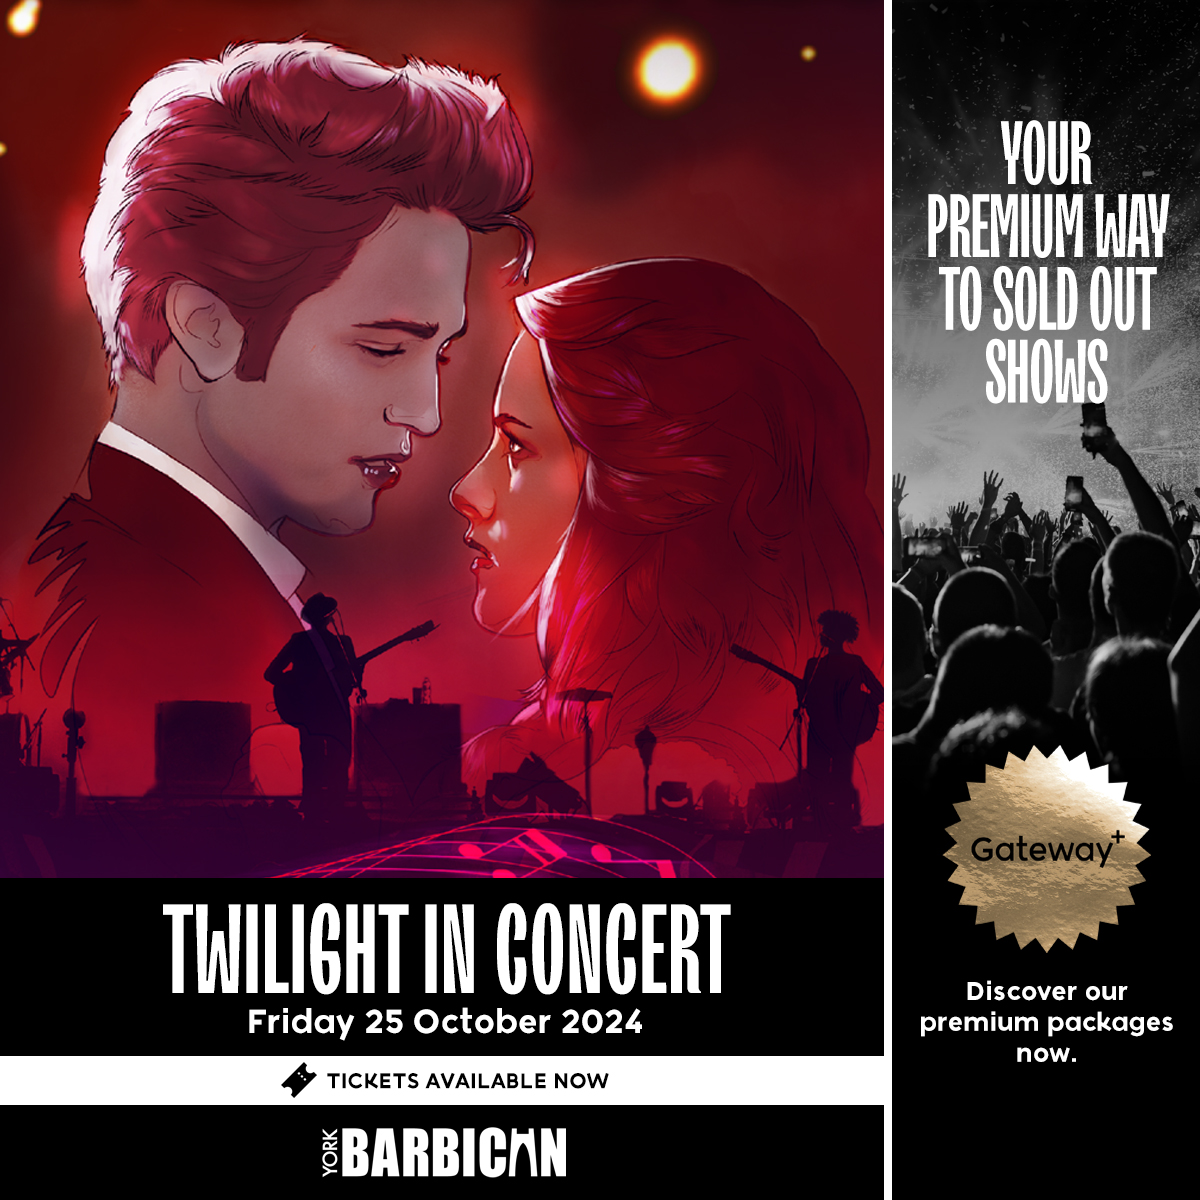 ❤️🧛🐺 'No measure of time with you will be long enough, but let's start with forever...' #TwilightInConcert: The Film with Live Band comes to @yorkbarbican! 🎟️ Tickets: yorkbarbican.co.uk/whats-on/twili… ➕ Gateway+ Premium: yorkbarbican.seatunique.com/music-tickets/… #York #YorkBarbican @thisisyo1